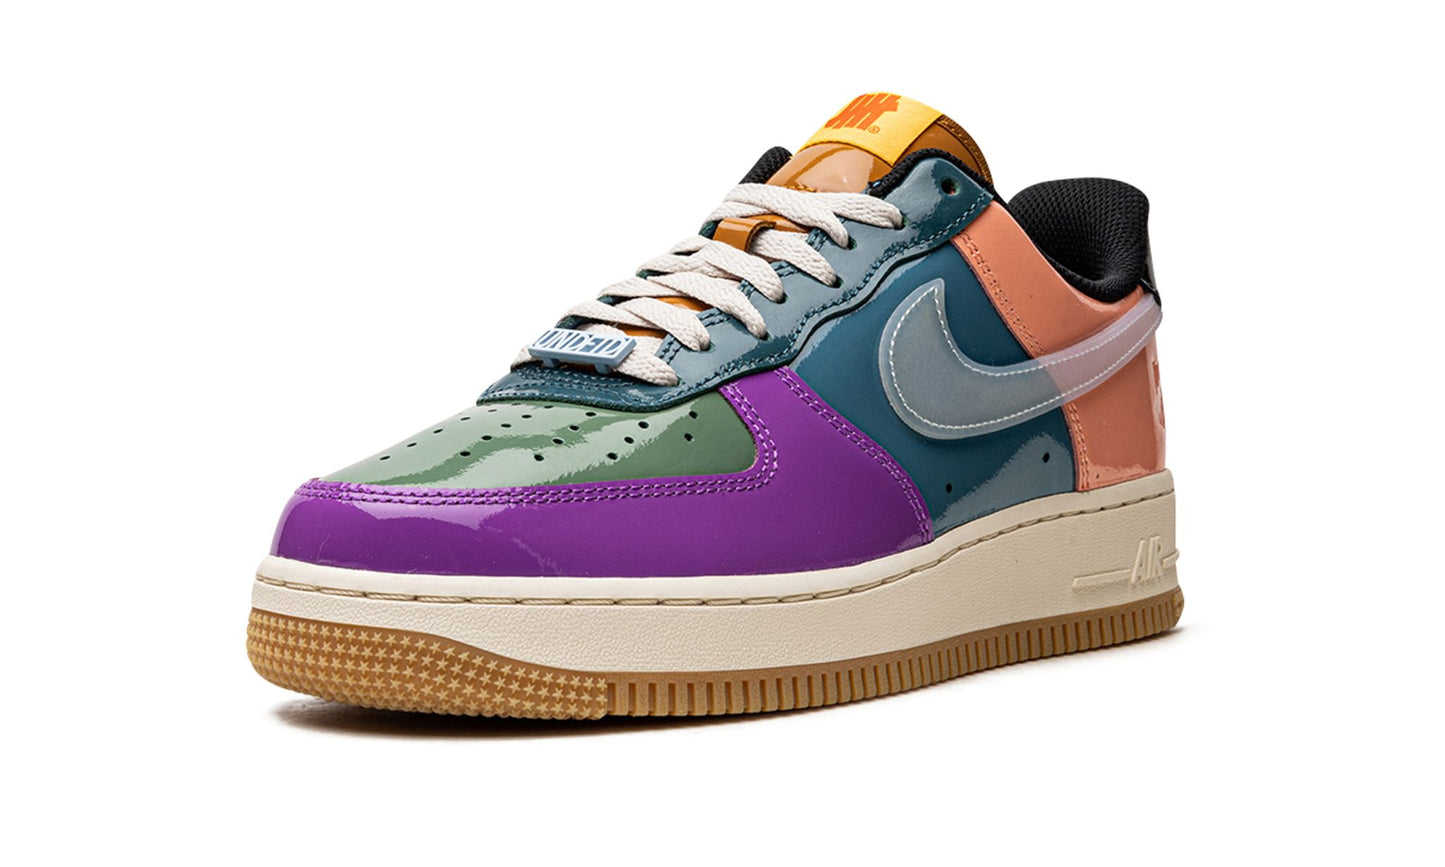 Nike Air Force 1 Low Undefeated Multi Patent Celestine Blue